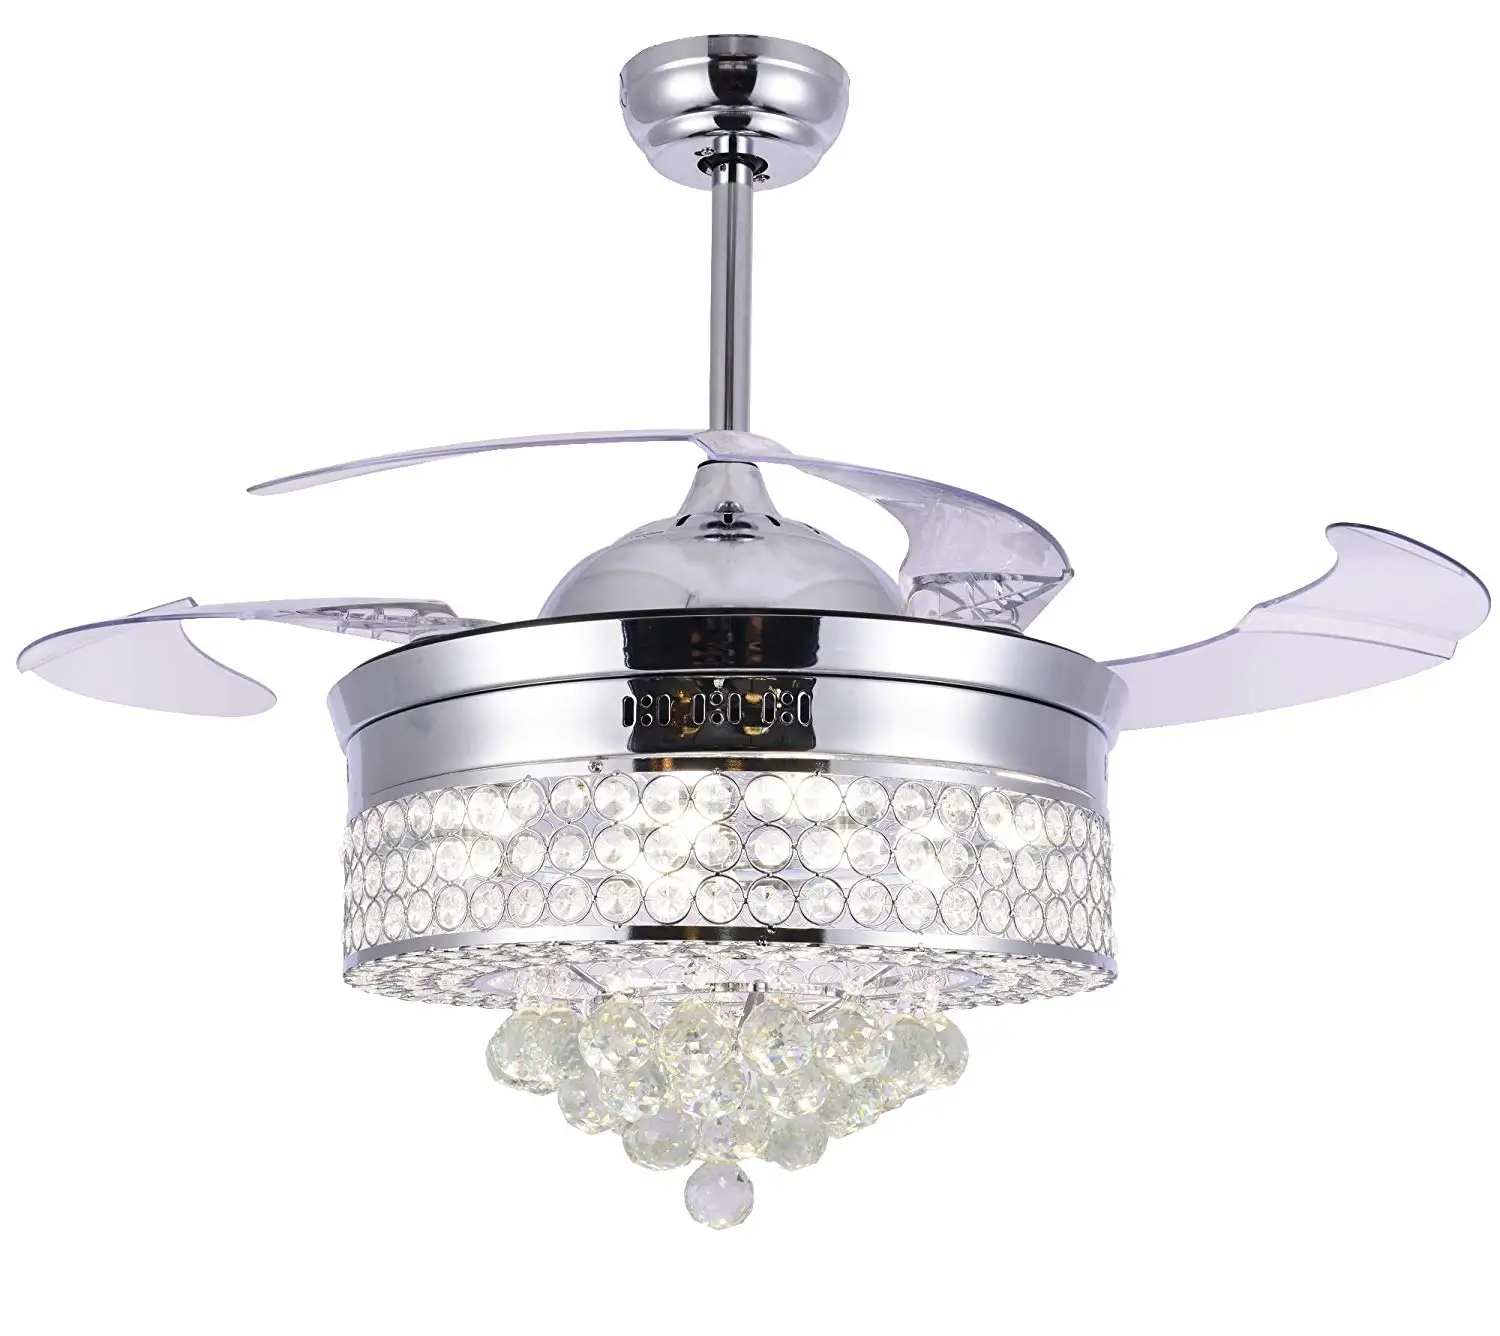 Cheap 52 Ceiling Fan With Light And Remote, find 52 Ceiling Fan With